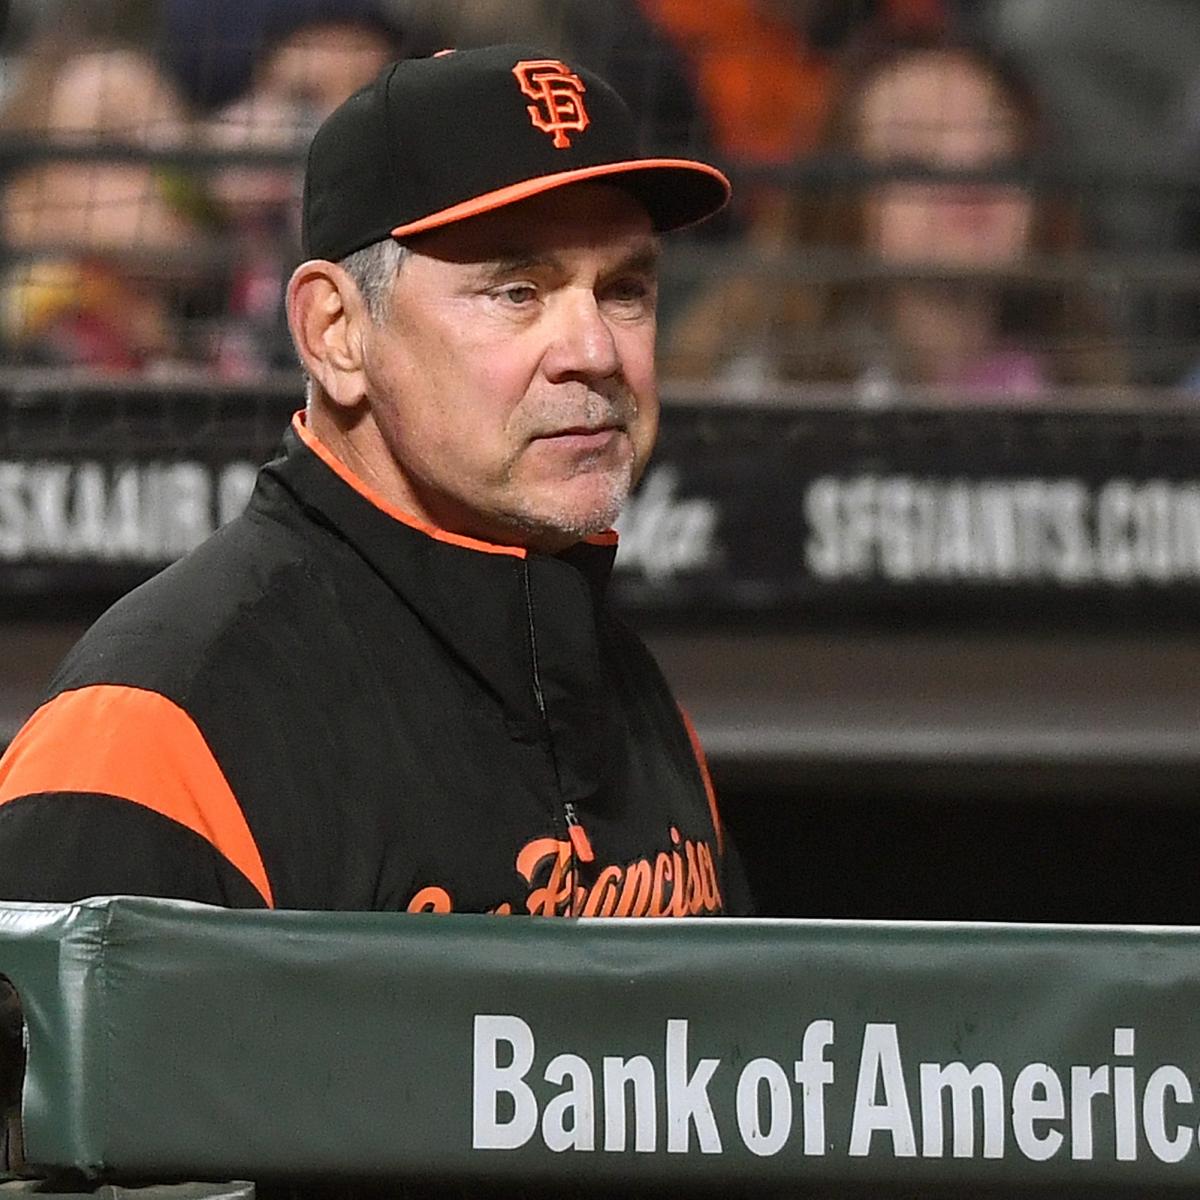 Bruce Bochy to Retire After 2019 Season; Won 3 World Series Titles with